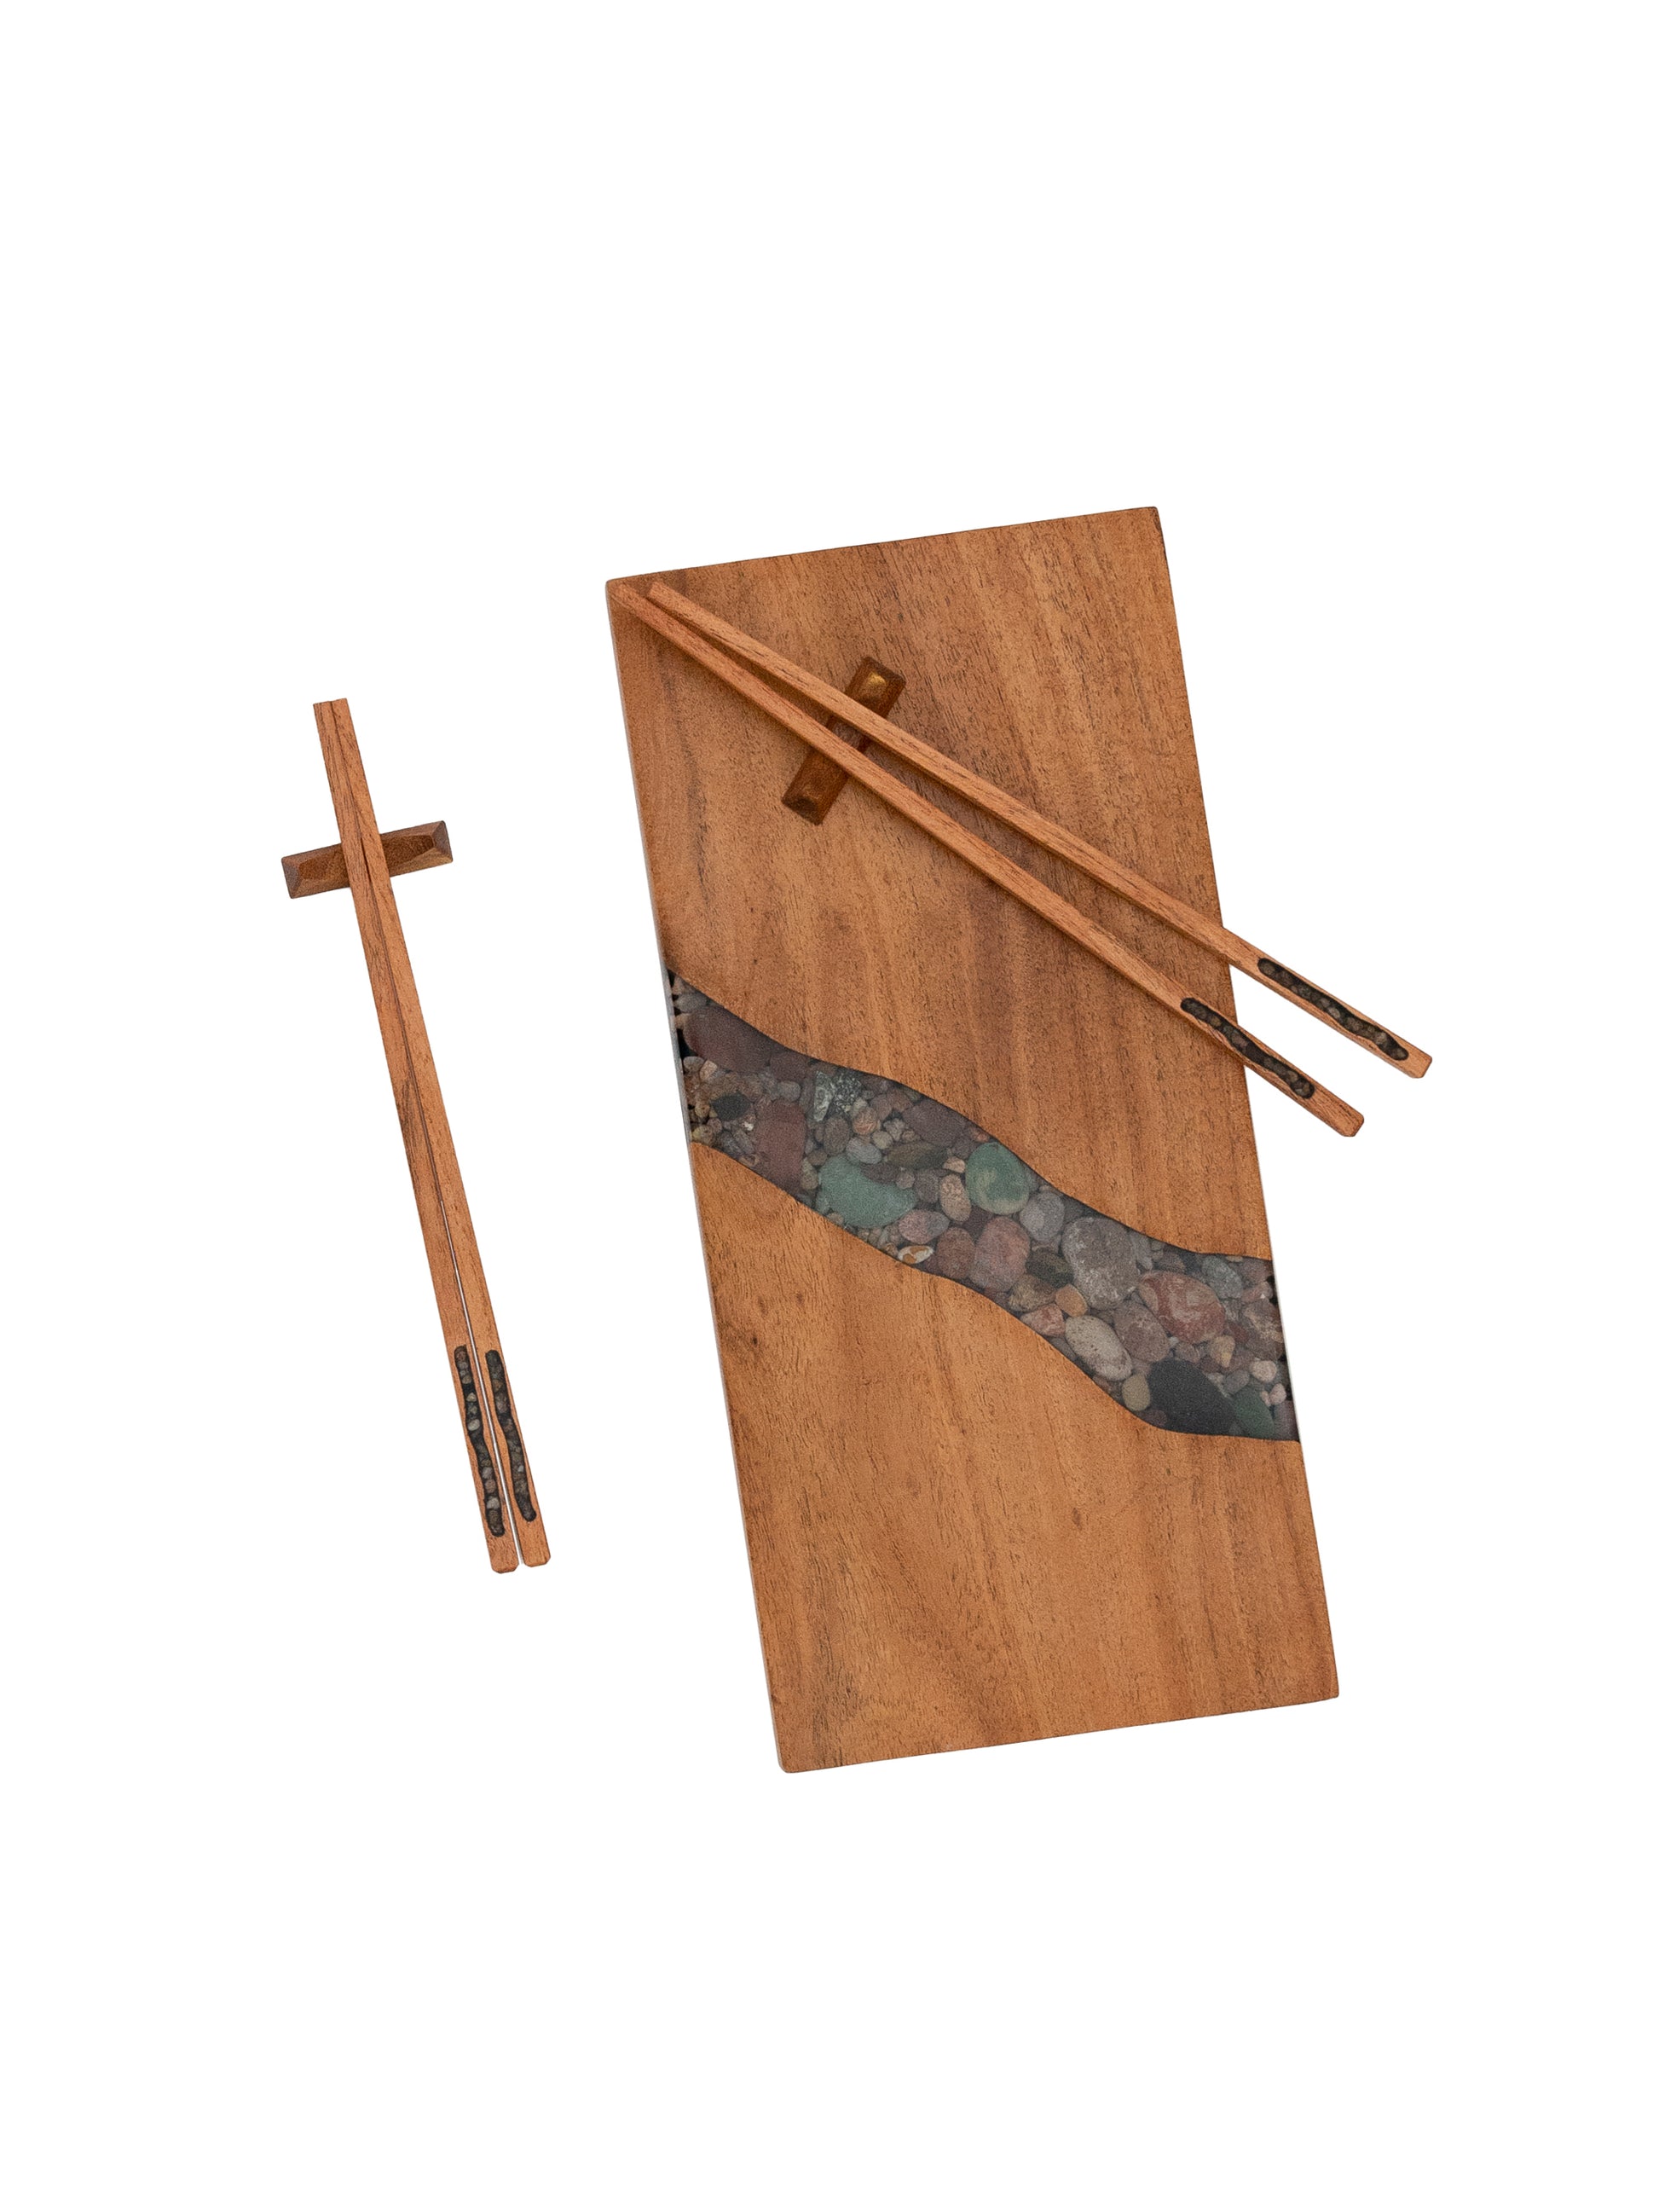 River Rock Inlay Sushi Board and Chopsticks Mesquite Weston Table